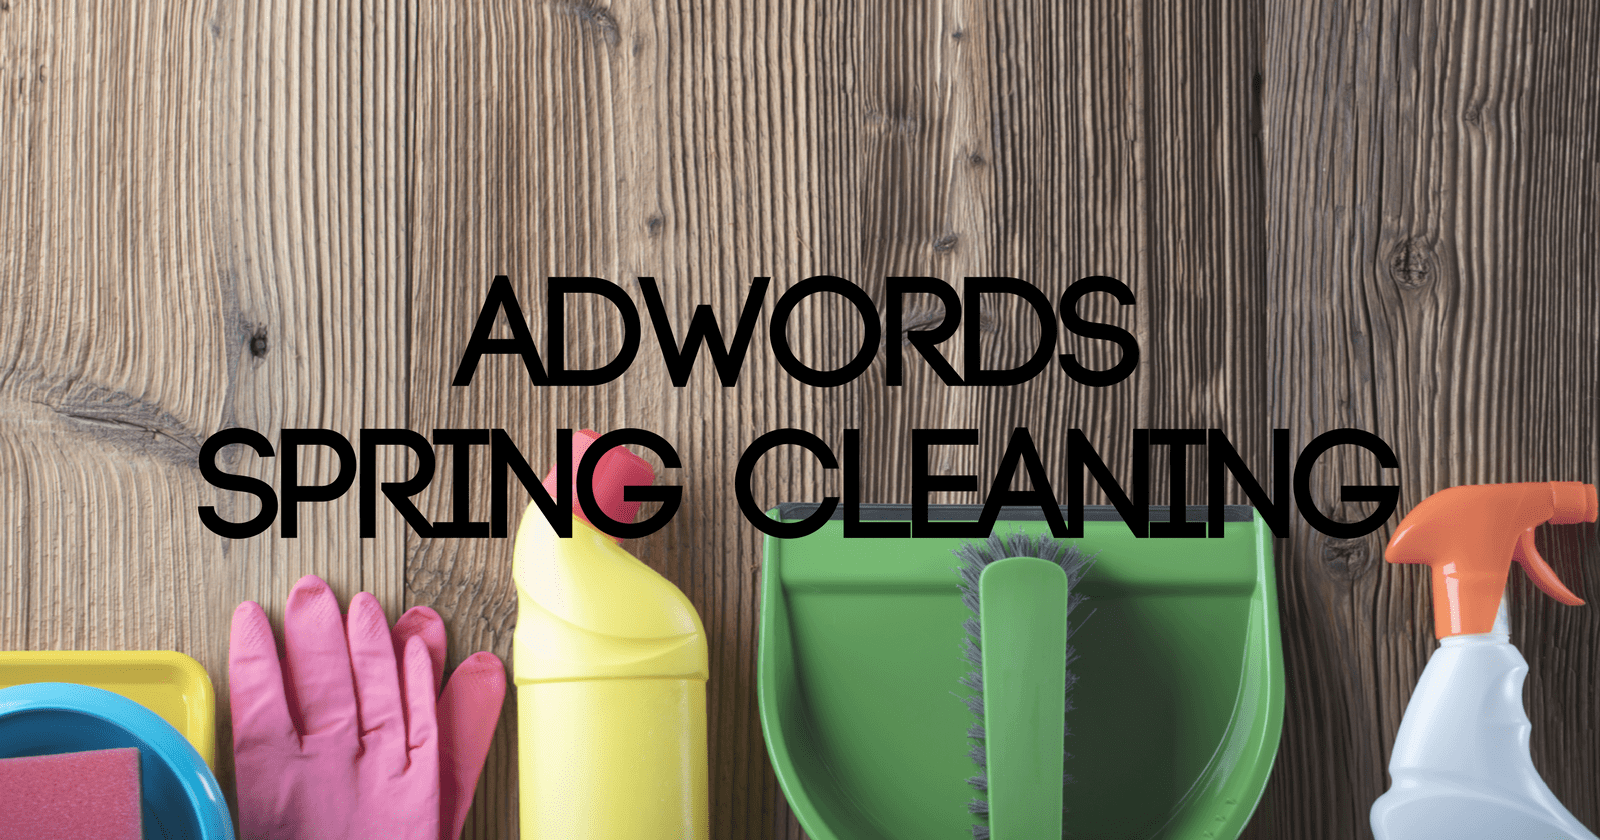 AdWords-Accounts-Spring-Cleaning